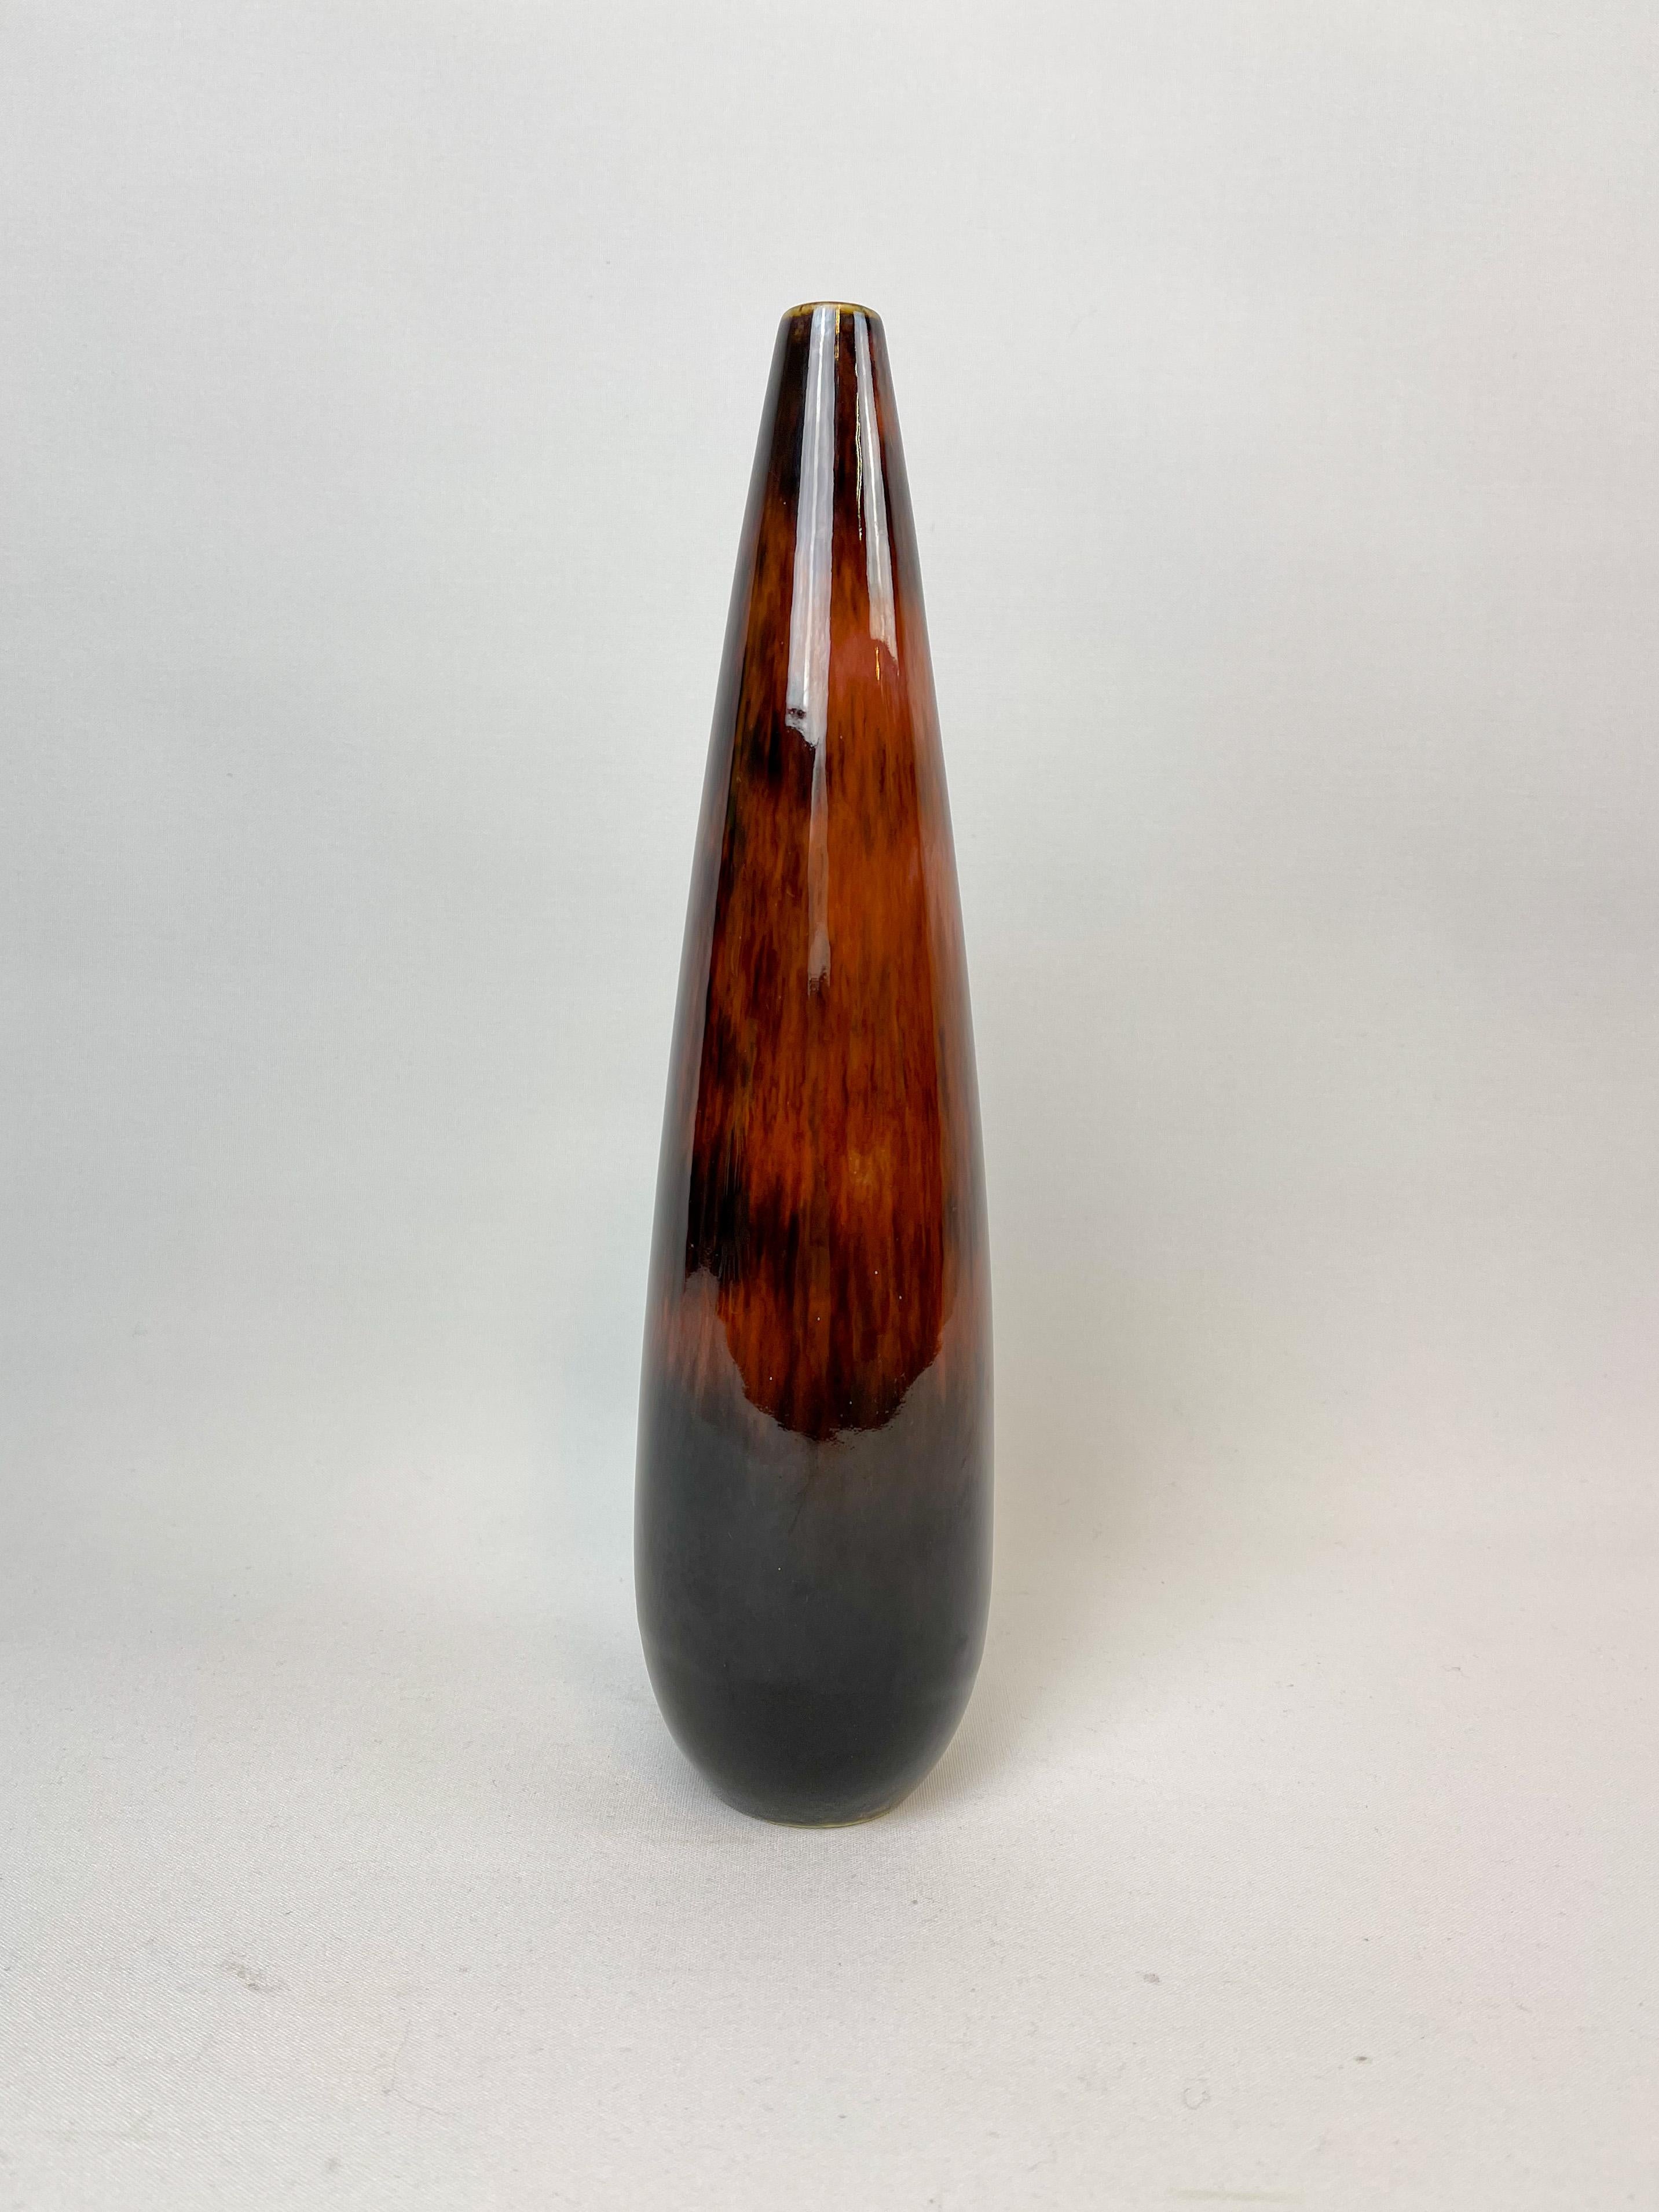 This stunning piece of ceramic was produced at Rörstrand and maker/designer Carl Harry Stålhane. Made in Sweden in the 1950s. Beautiful glazed vases with nice lines. Its rounded bottom with darked glaze and the middle part with different colors end